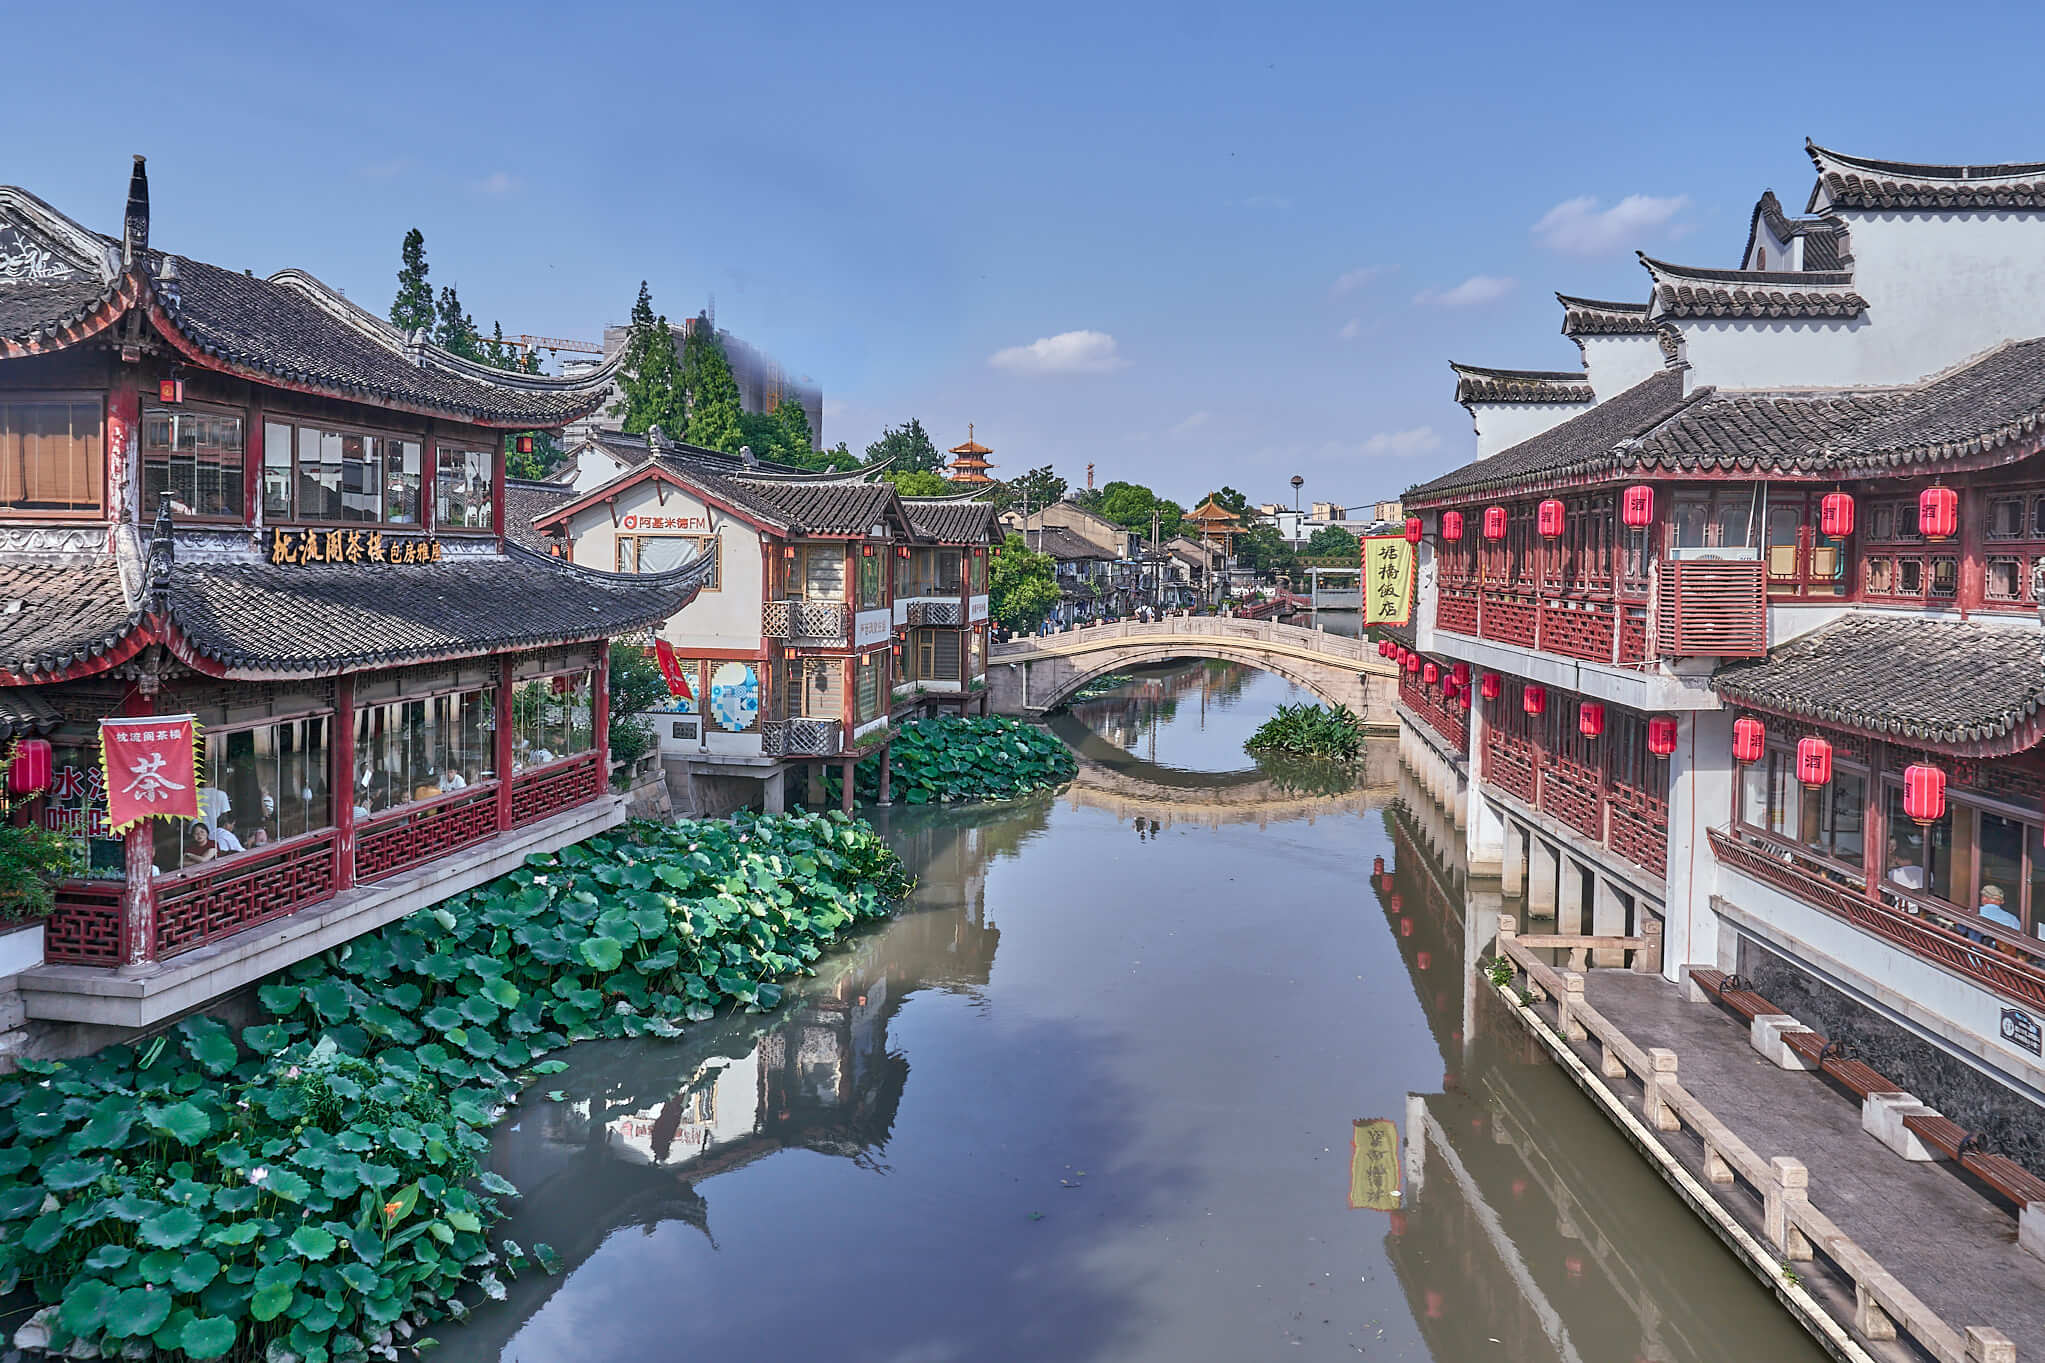 Qibao Ancient Water Town: A Glimpse of Old Shanghai’s Charm